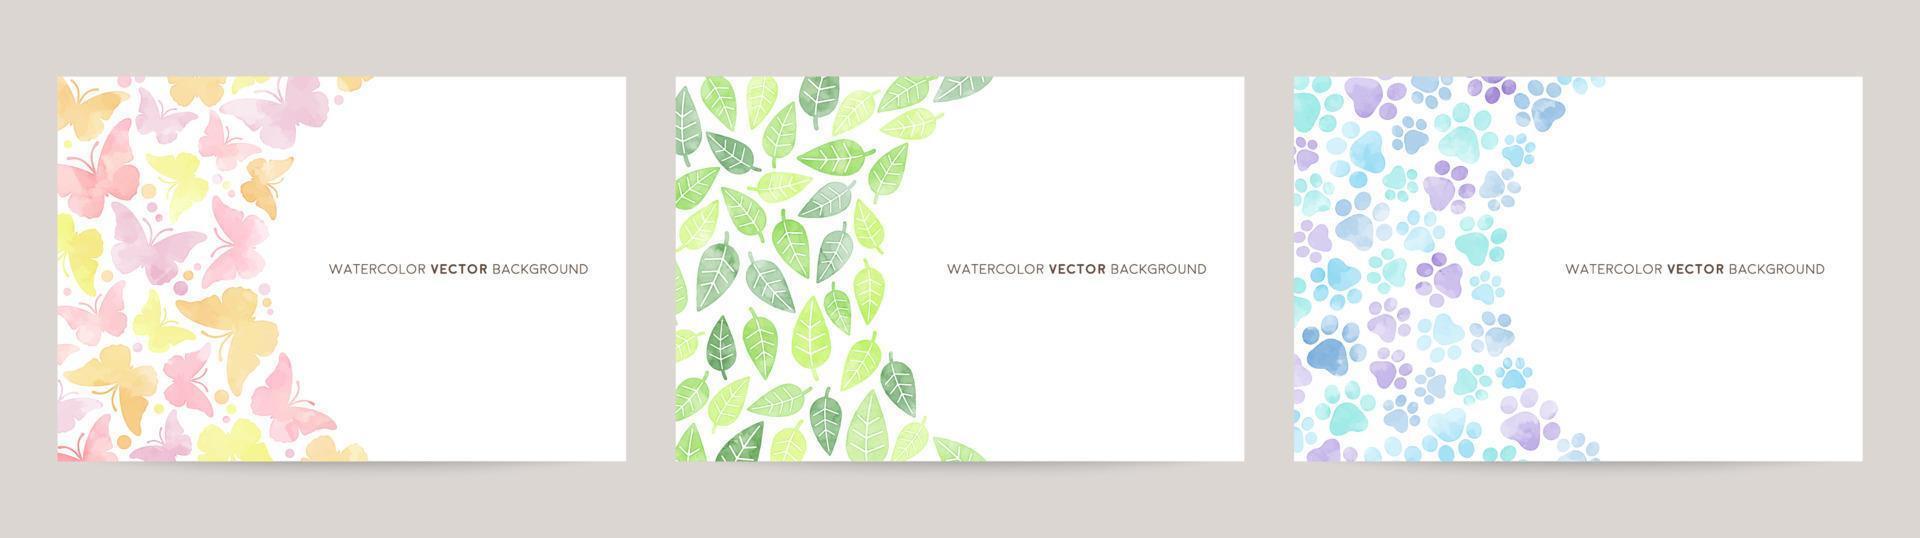 watercolor vector card background set